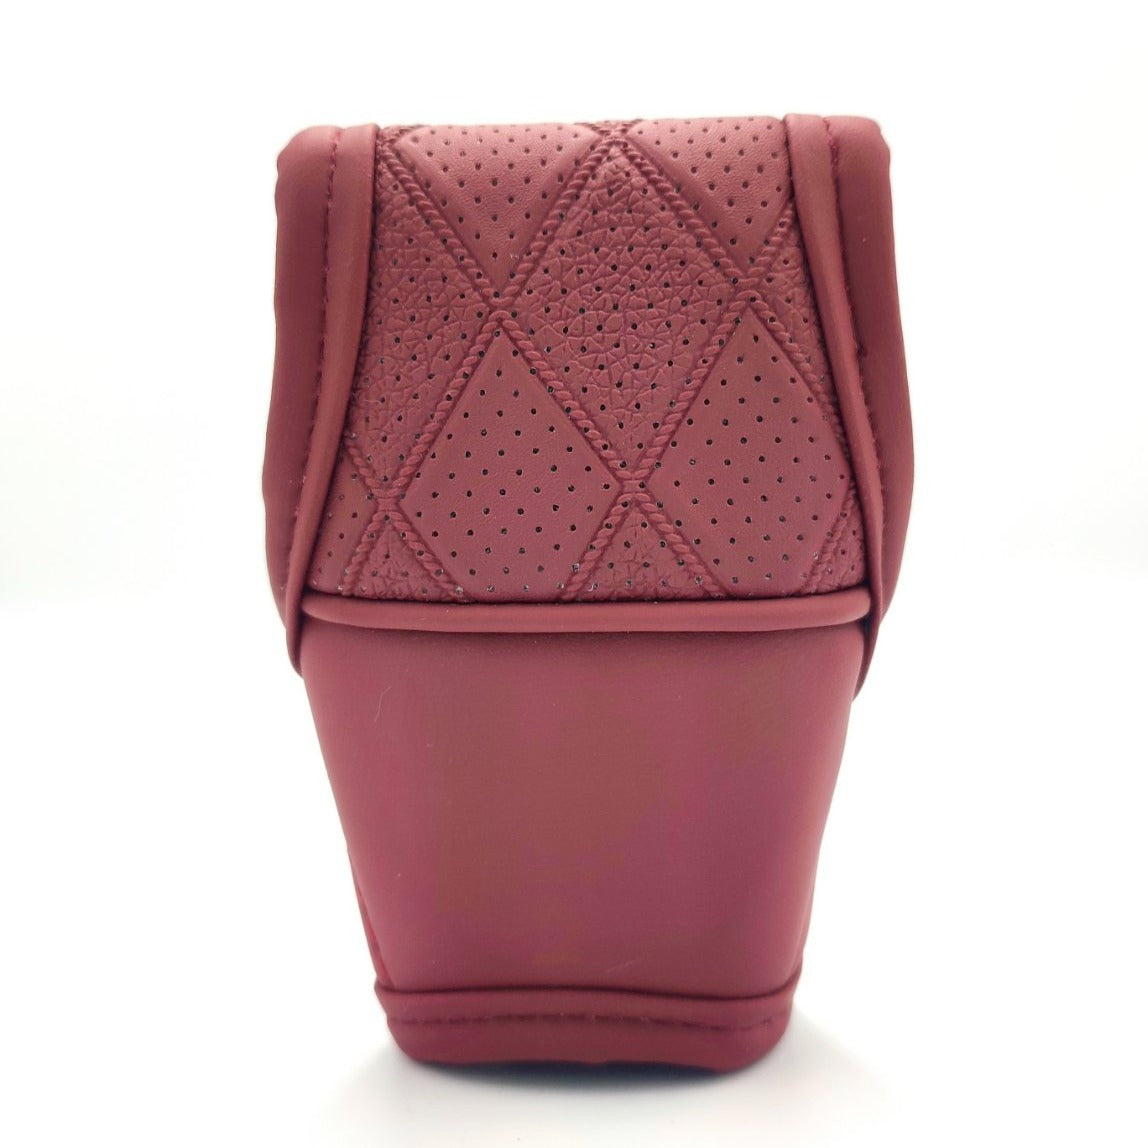 GEAR KNOB COVER (LEATHER) (WINE RED)